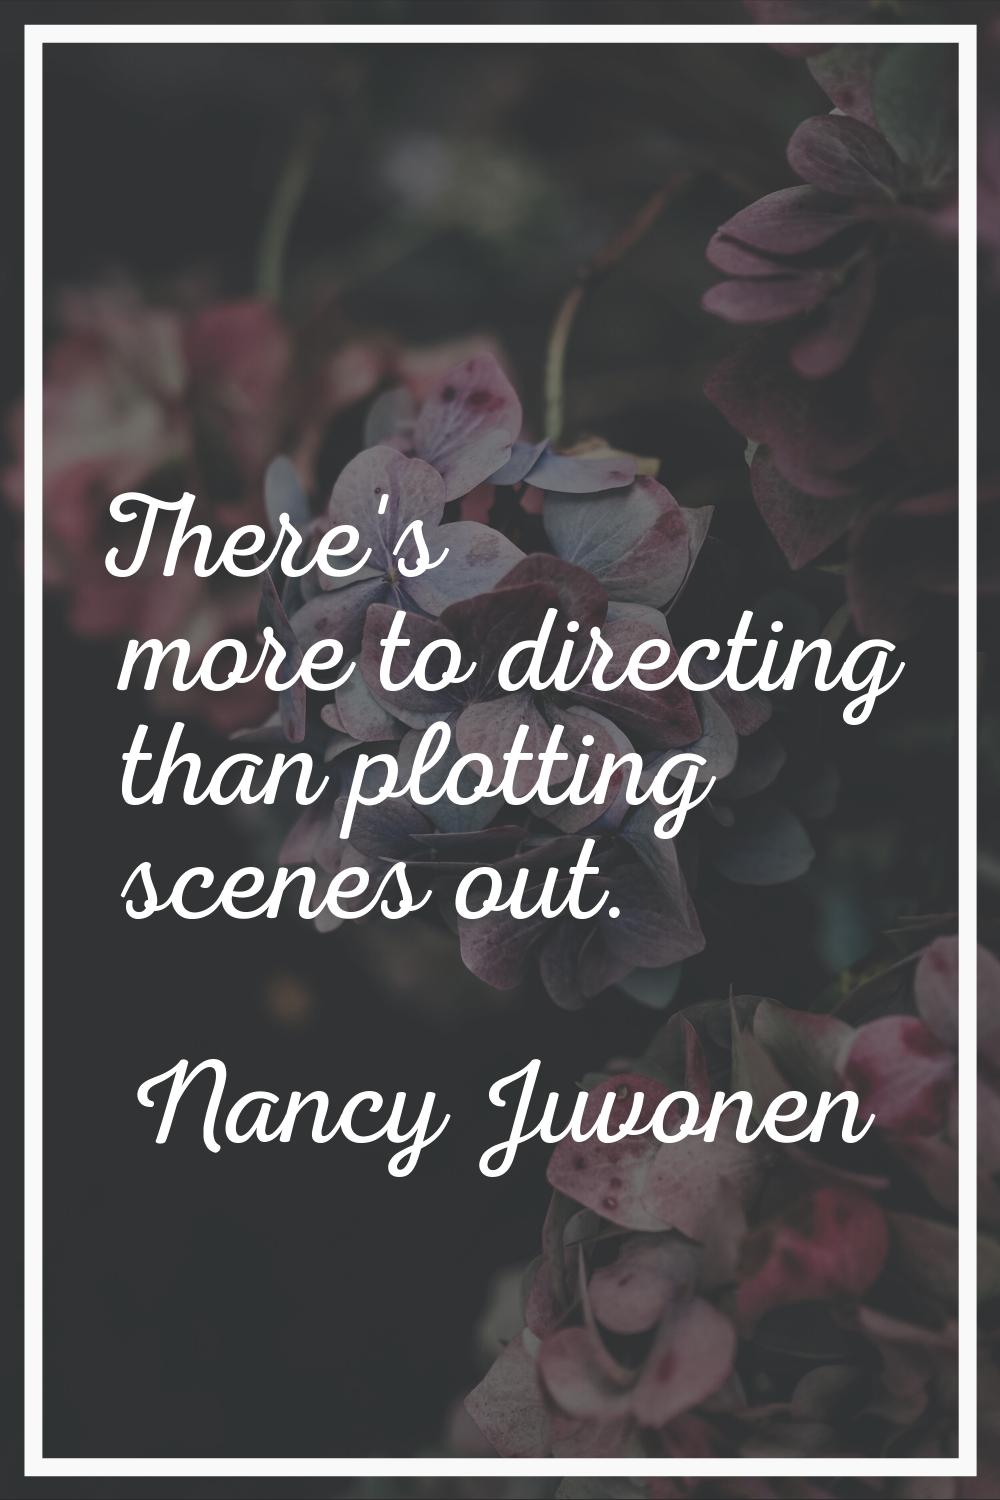 There's more to directing than plotting scenes out.